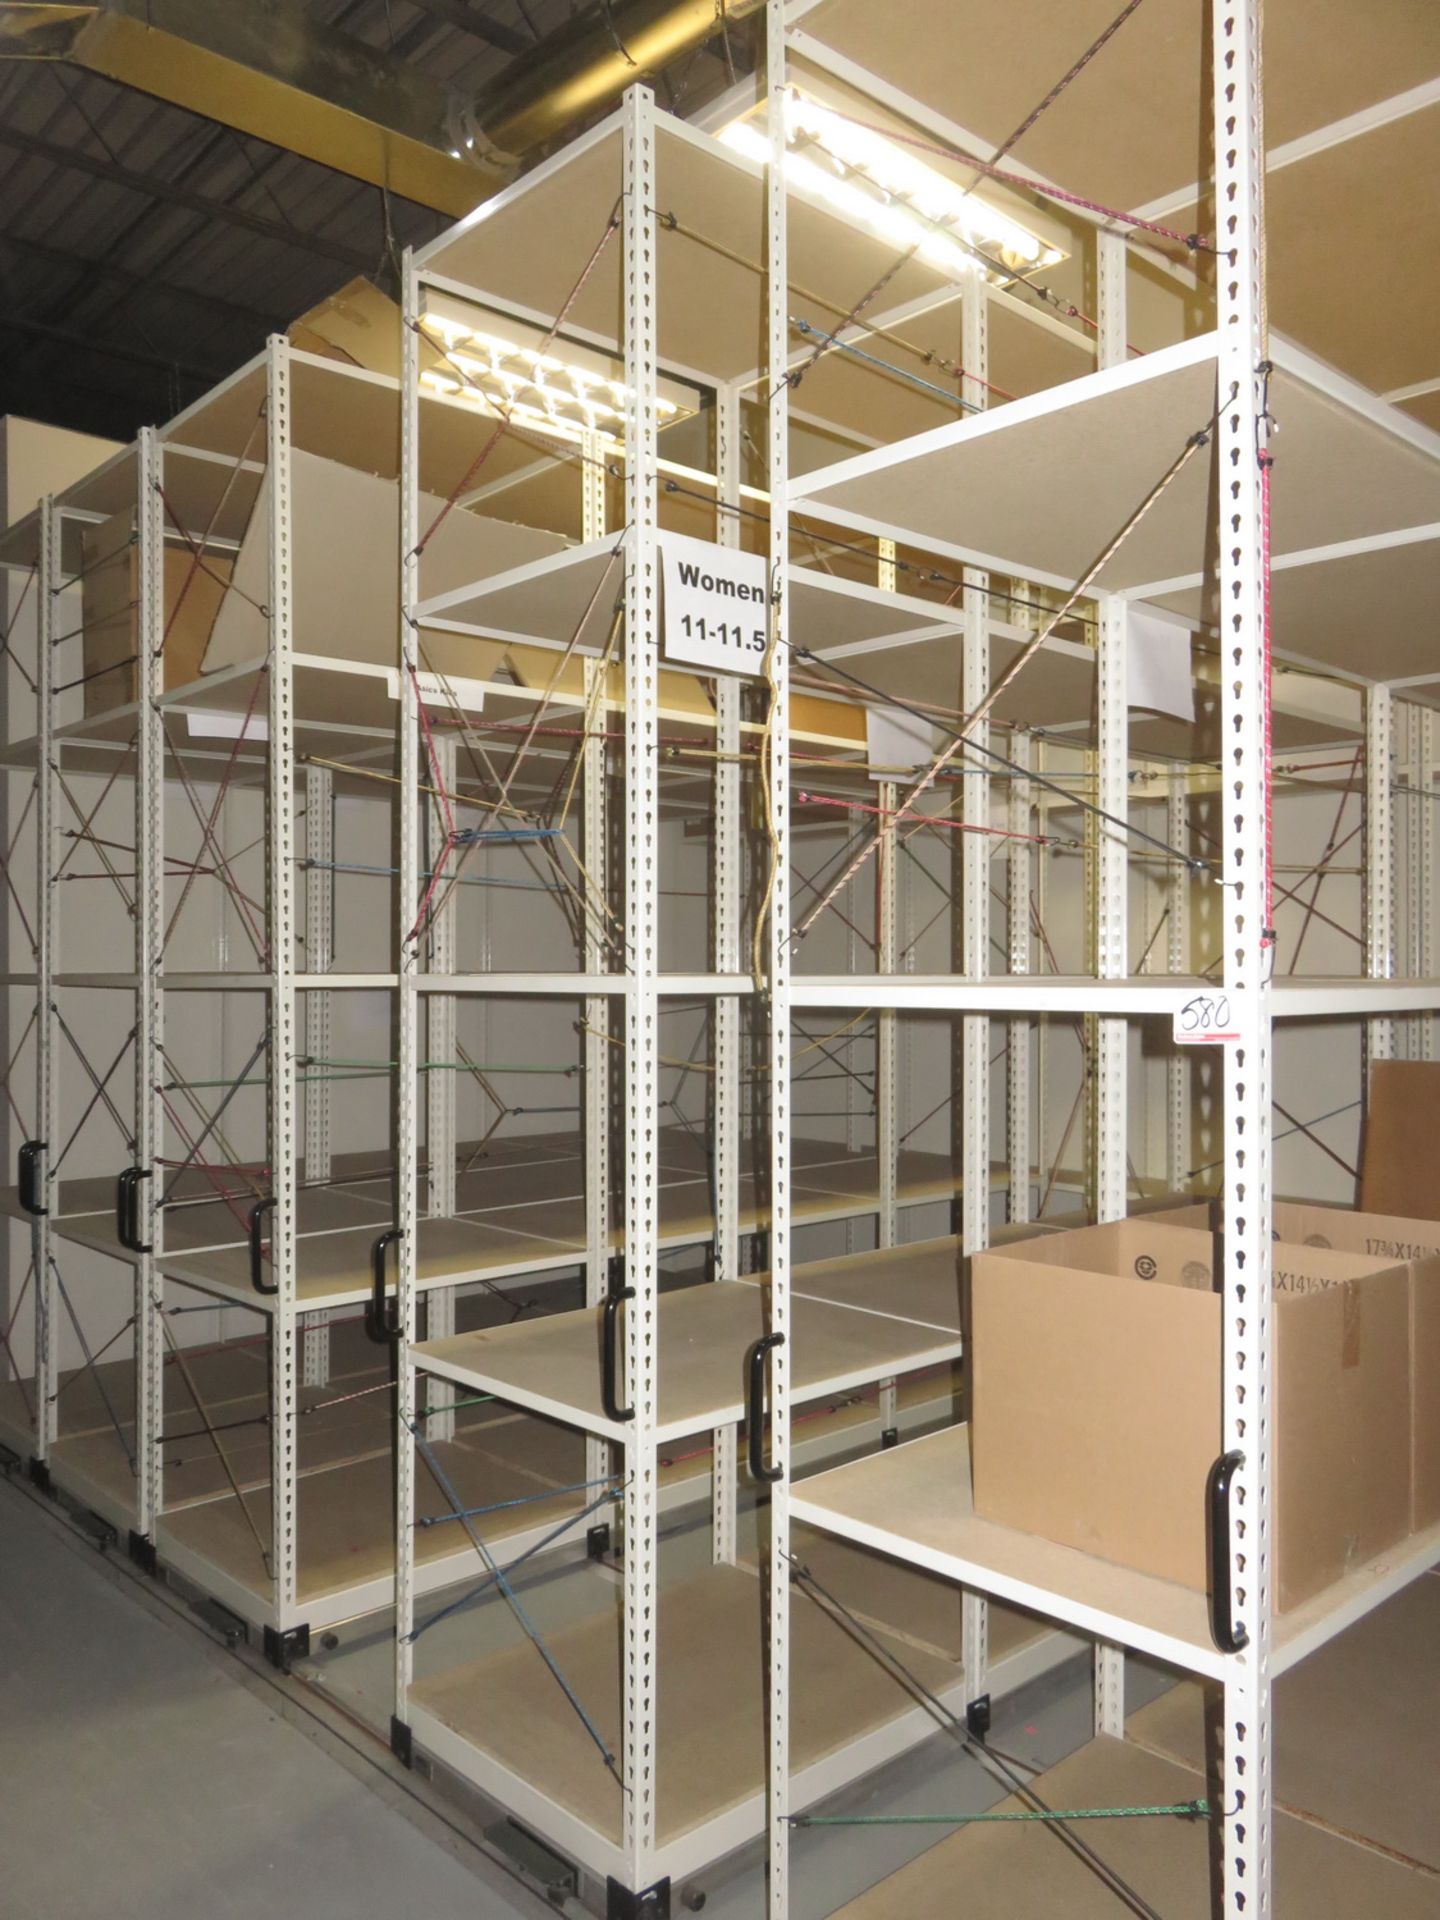 LOT - SPACE SAVER SHELVING STORAGE SYSTEM C/W(15) SECTIONS BEIGE STEEL & WOOD SHELF SHELVING